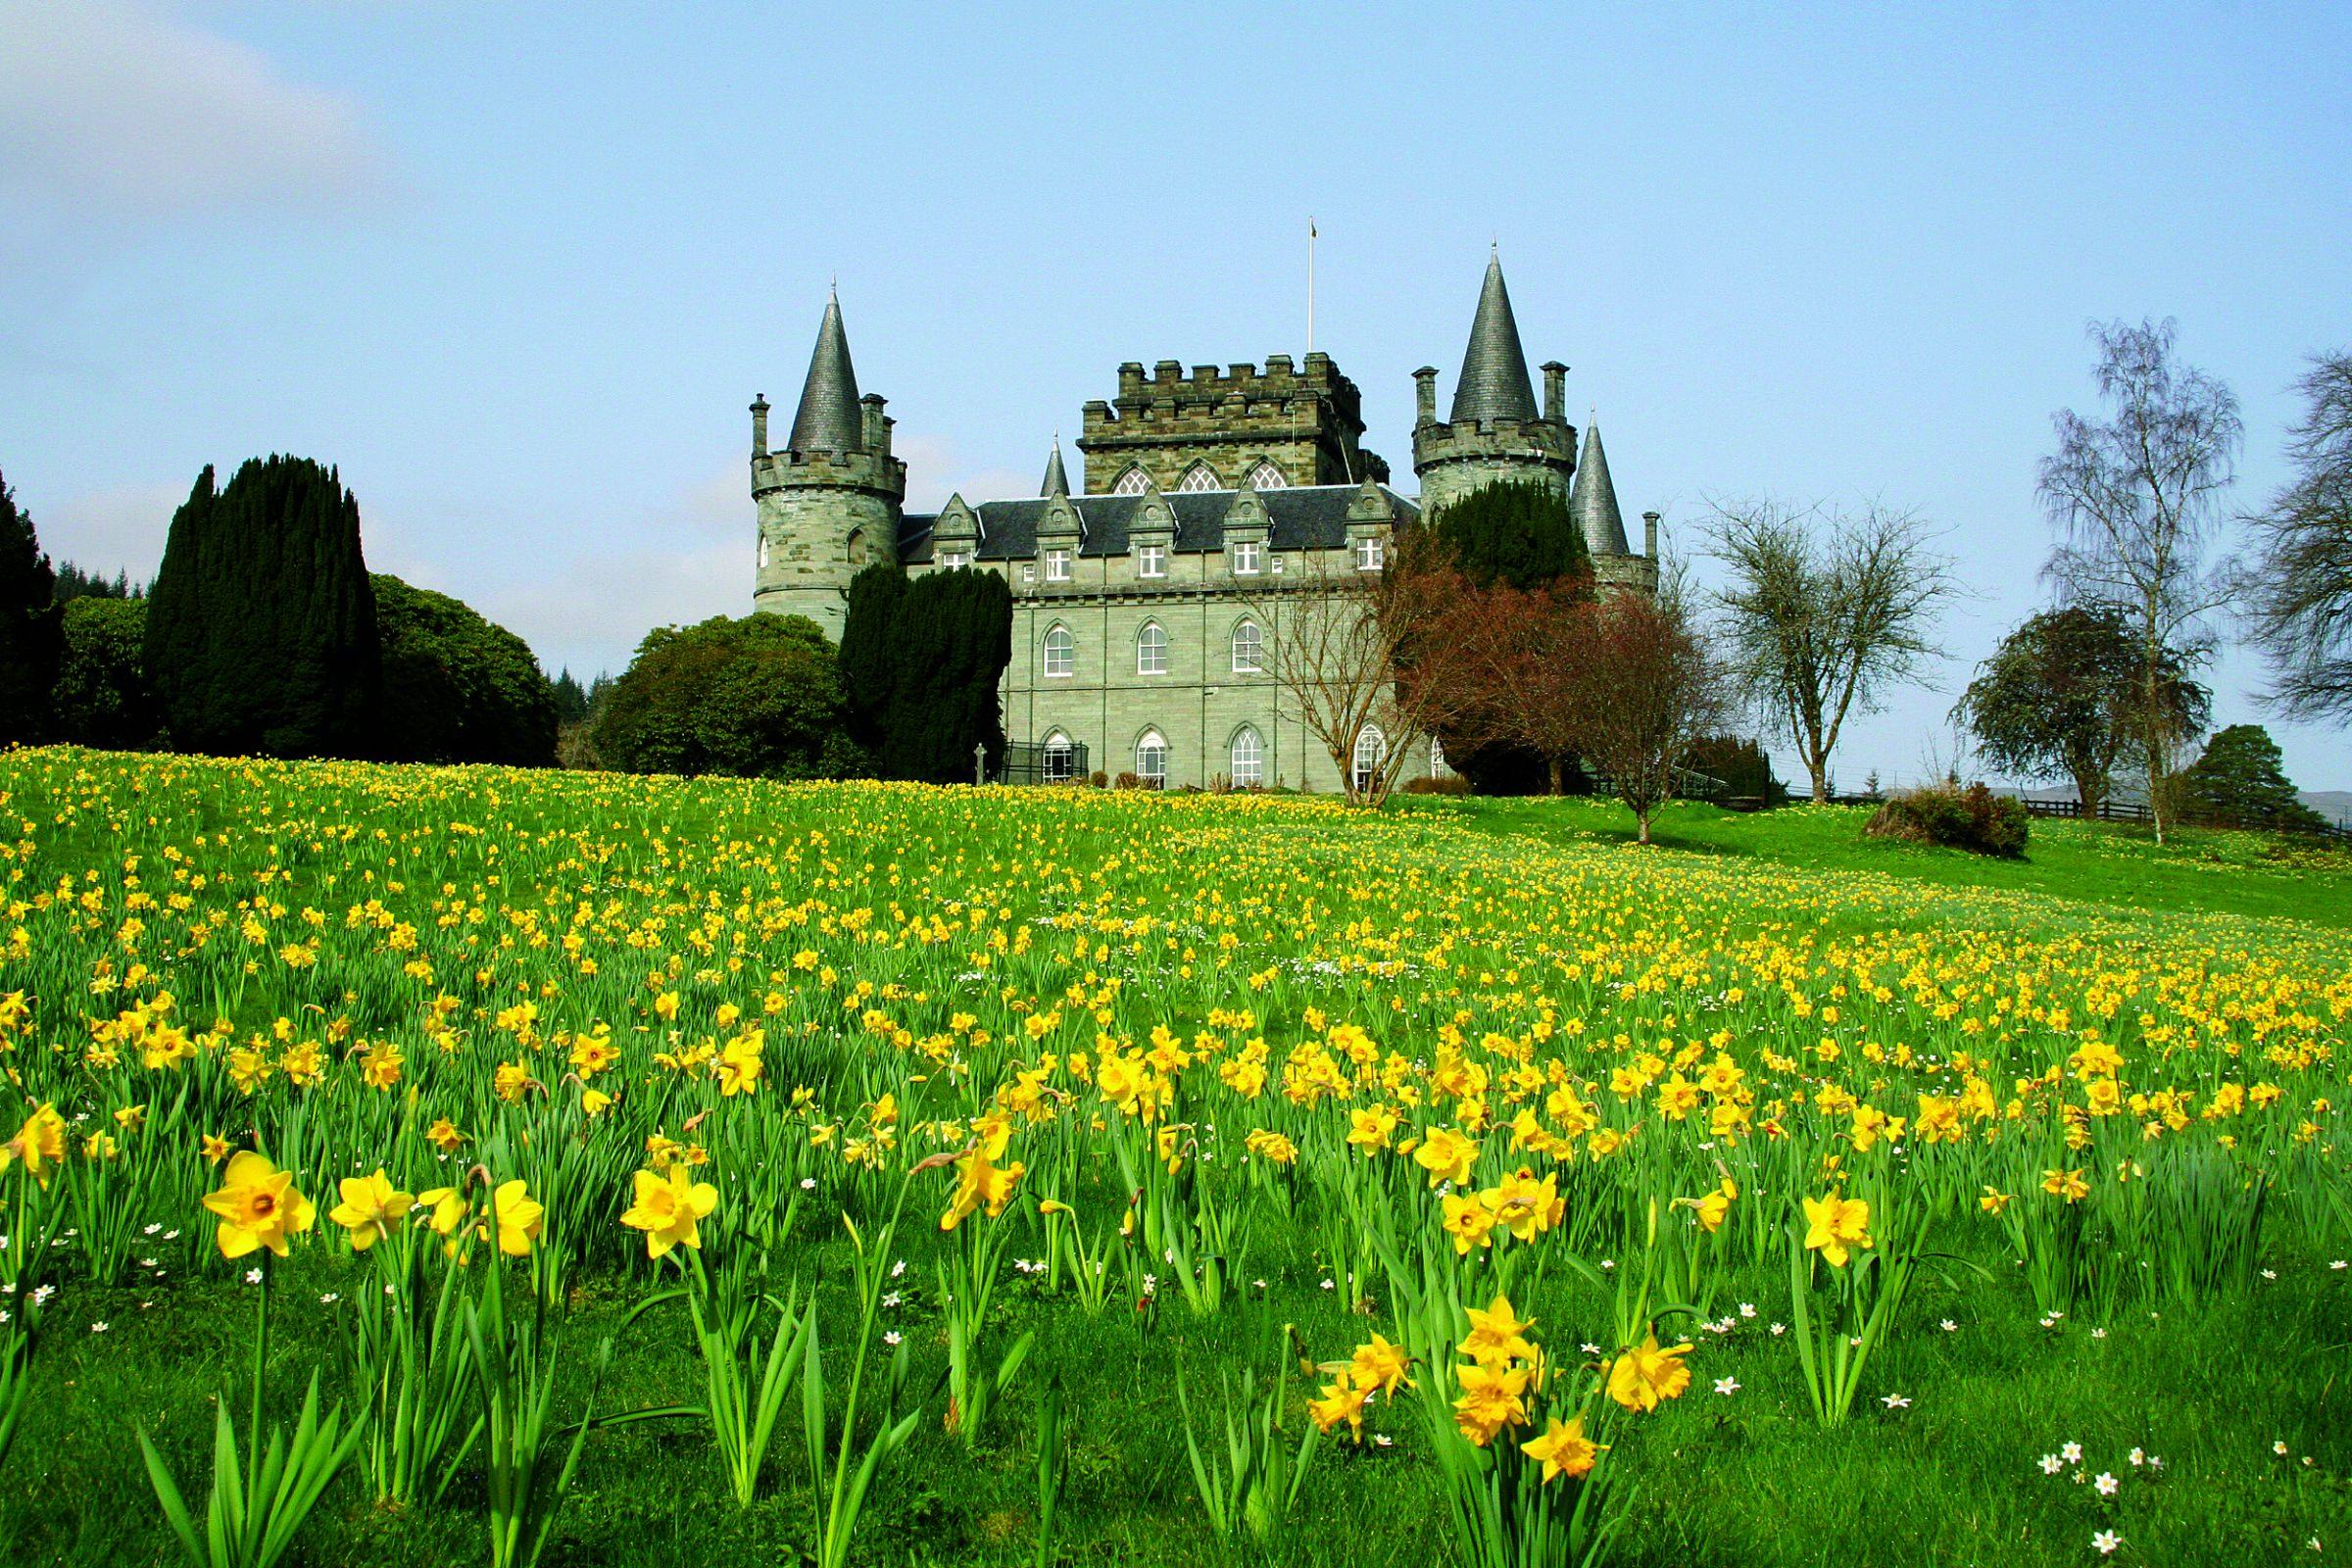 Inveraray Castle in Scotland, which featured in A Very British Scandal and, in 2012, Downton Abbey, as the fictional Duneagle Castle.